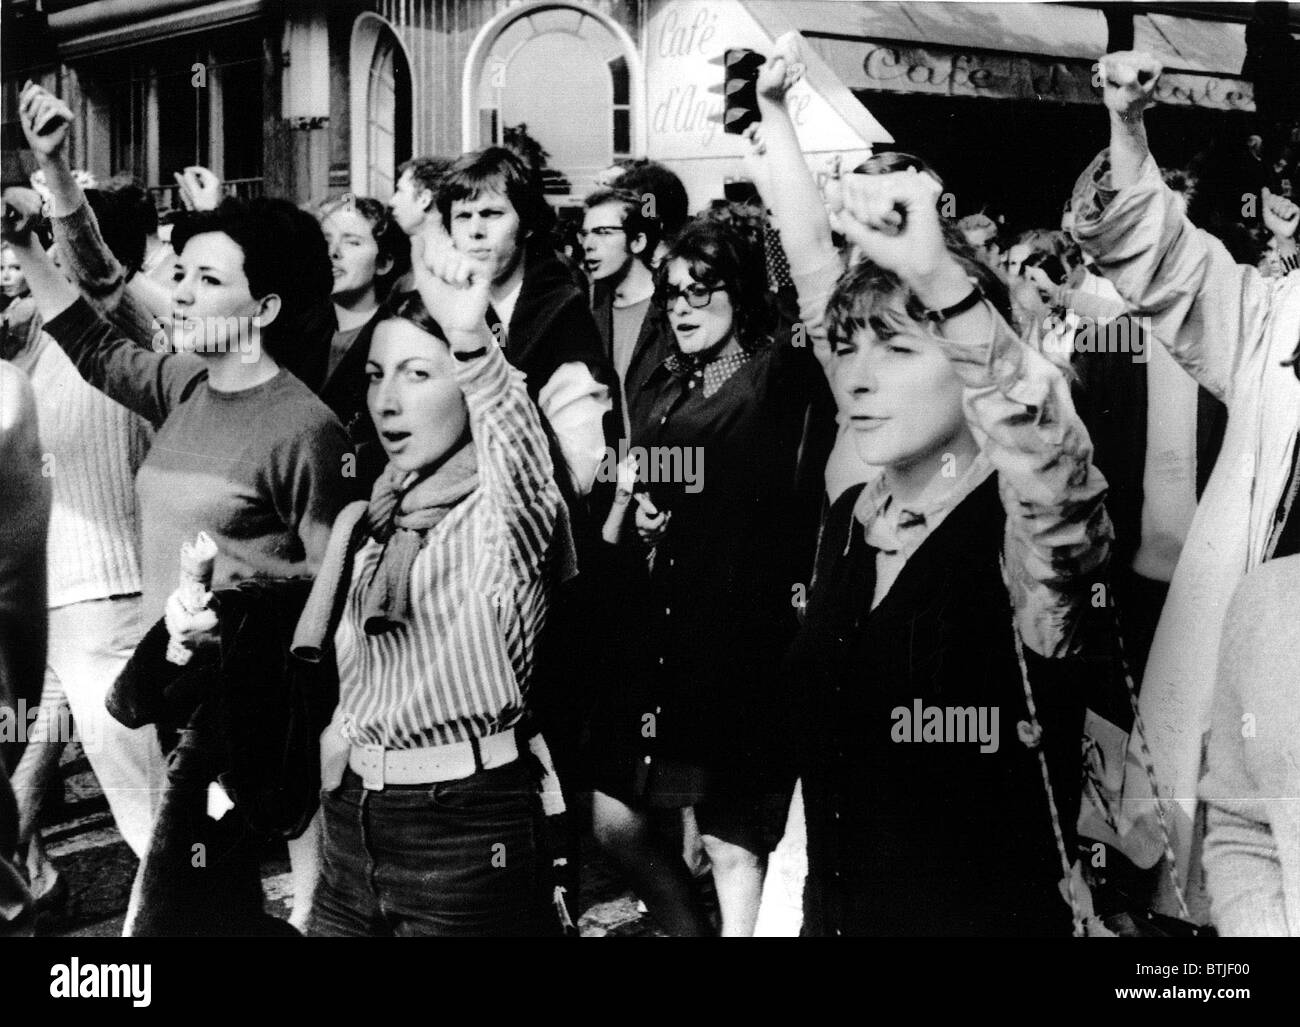 MARCHES-Men & women throw their arms in the air during a march through the streets of downtown Paris for popular government in F Stock Photo